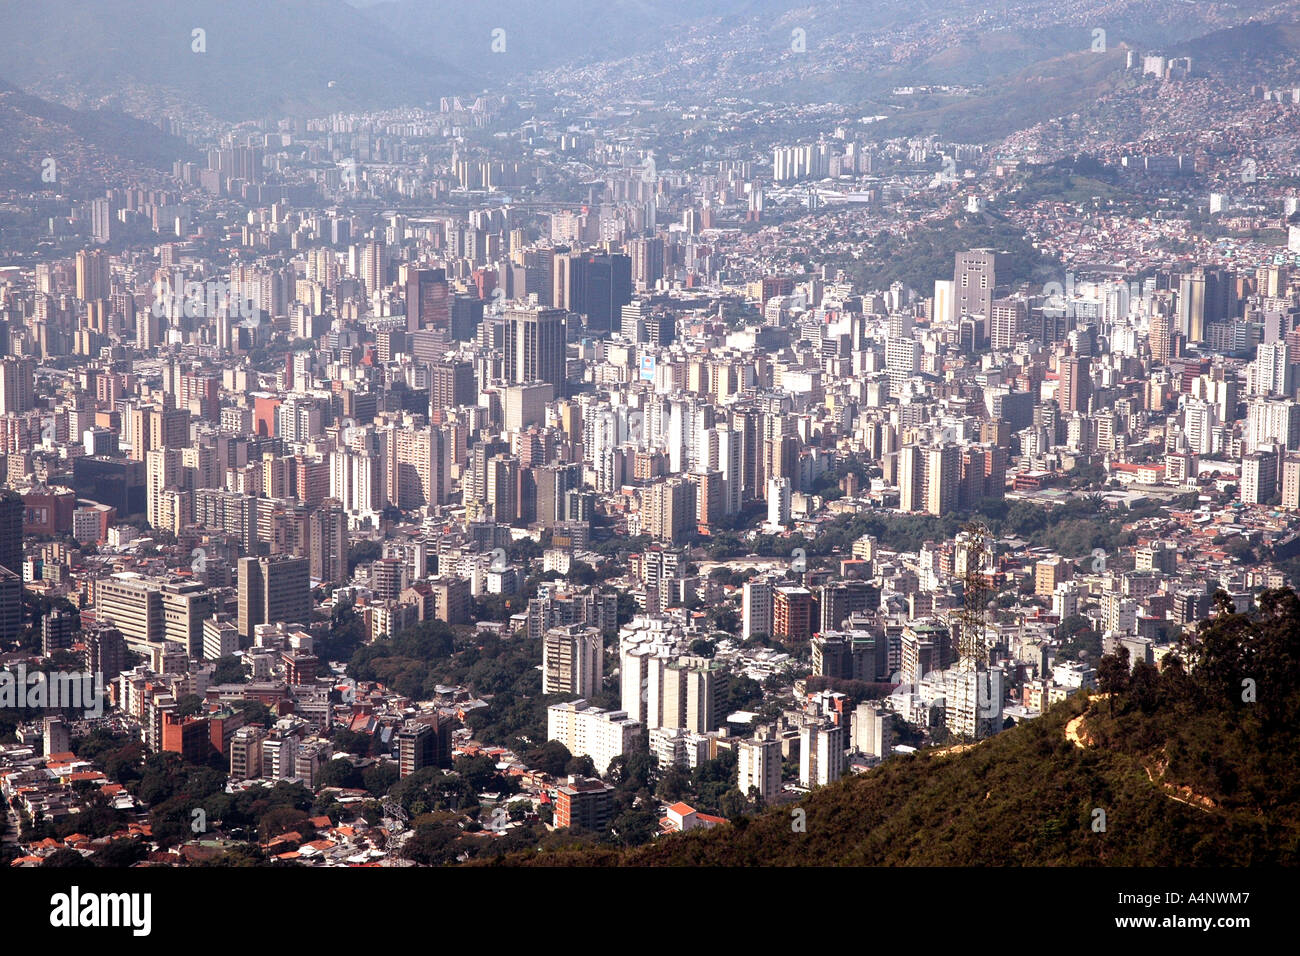 Caracas, capital of Venezuela, from the slopes of El Avila mountain Andes slopes adventure tourism travel Stock Photo